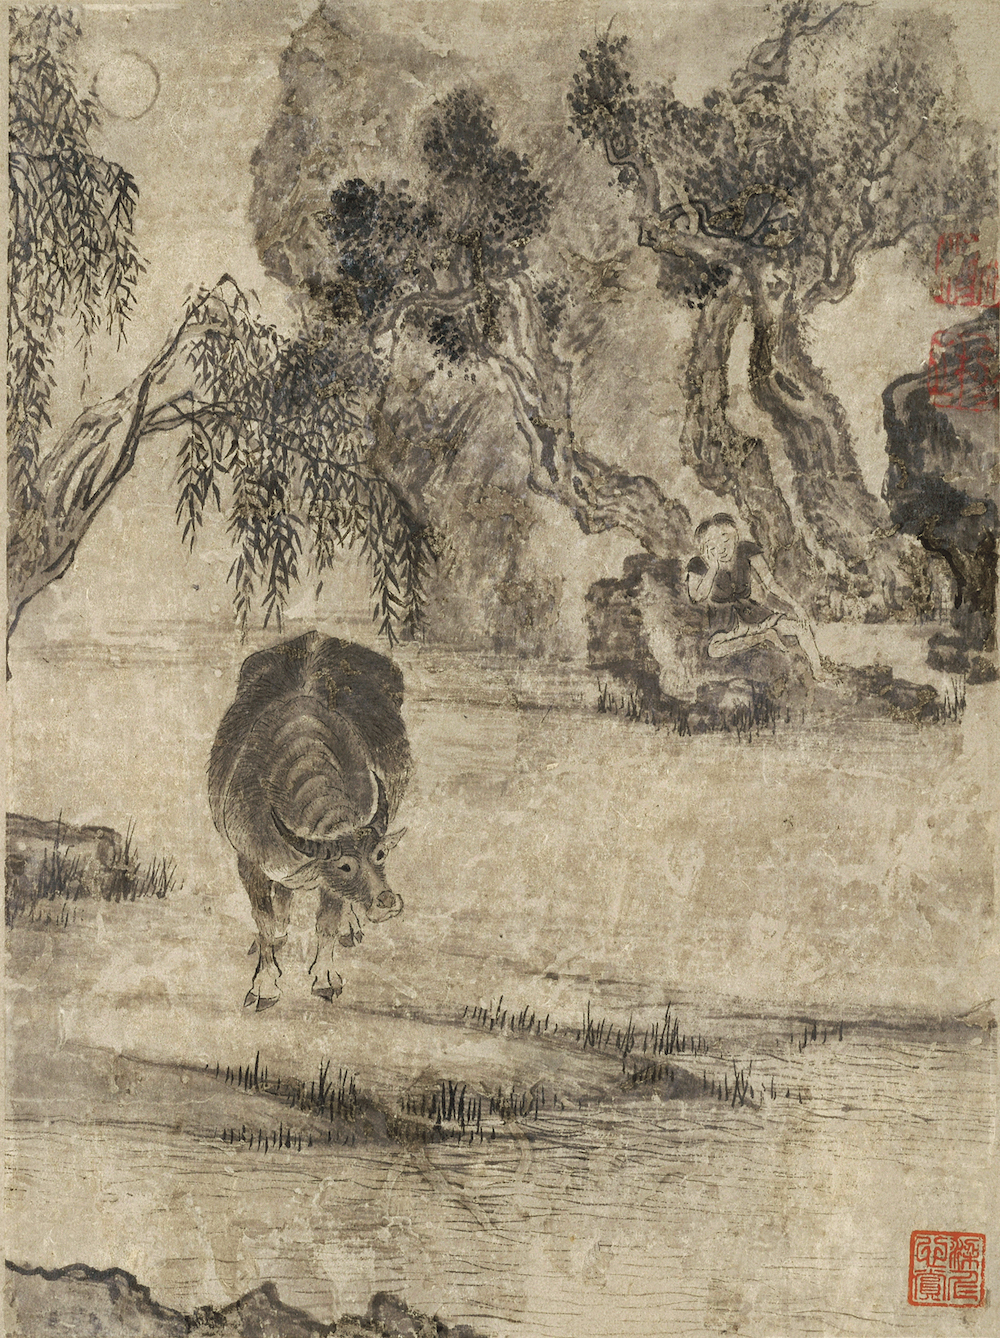 (Ming) Zhang Mu's Cattle Atlas·Ren Yun, ink and color on paper, vertical 23.7 cm, horizontal 17.7 cm, donated by Mr. Yang Quan, collected by Guangzhou Art Museum